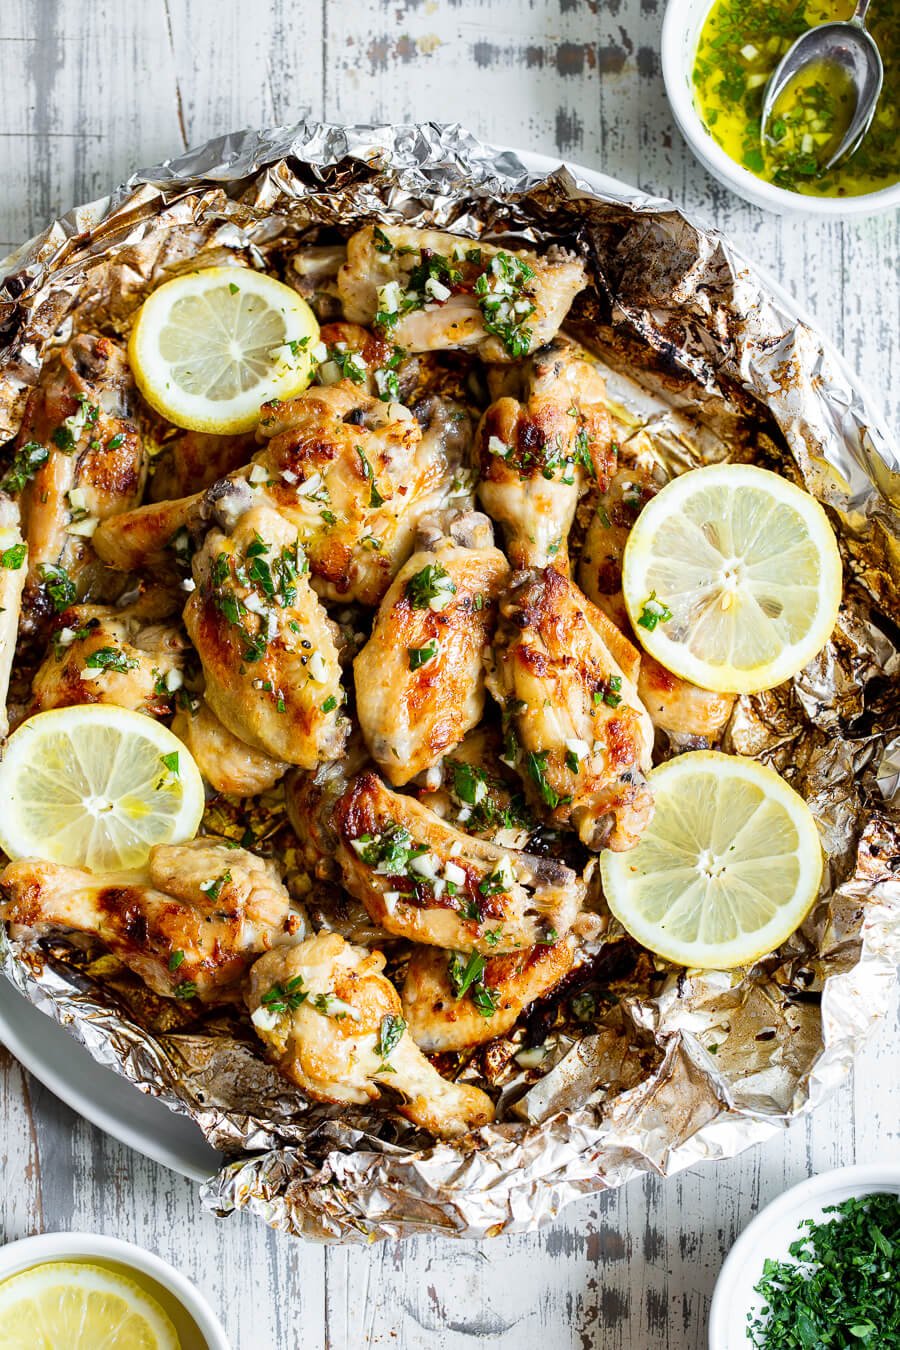 Plate of grilled wings with lemon wedges and chopped herbs